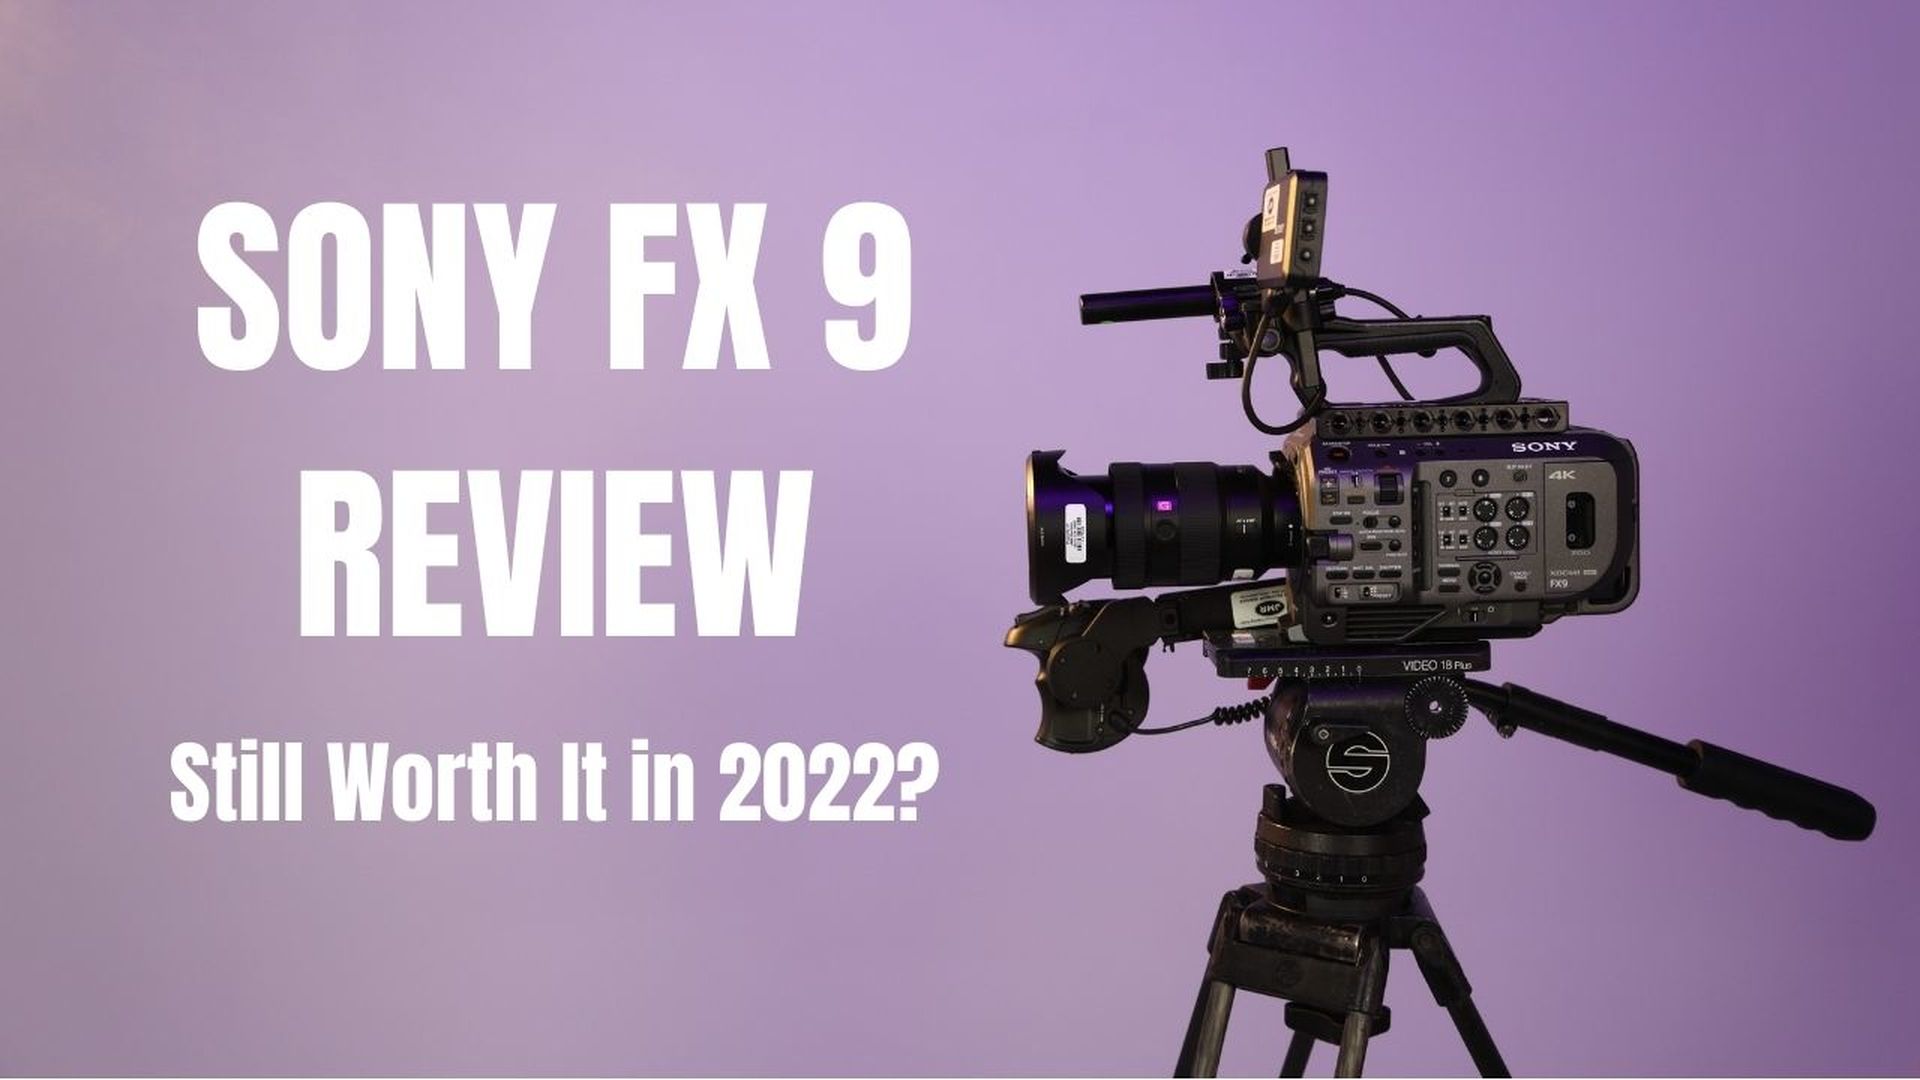 Episode 1021: Sony FX9 Review